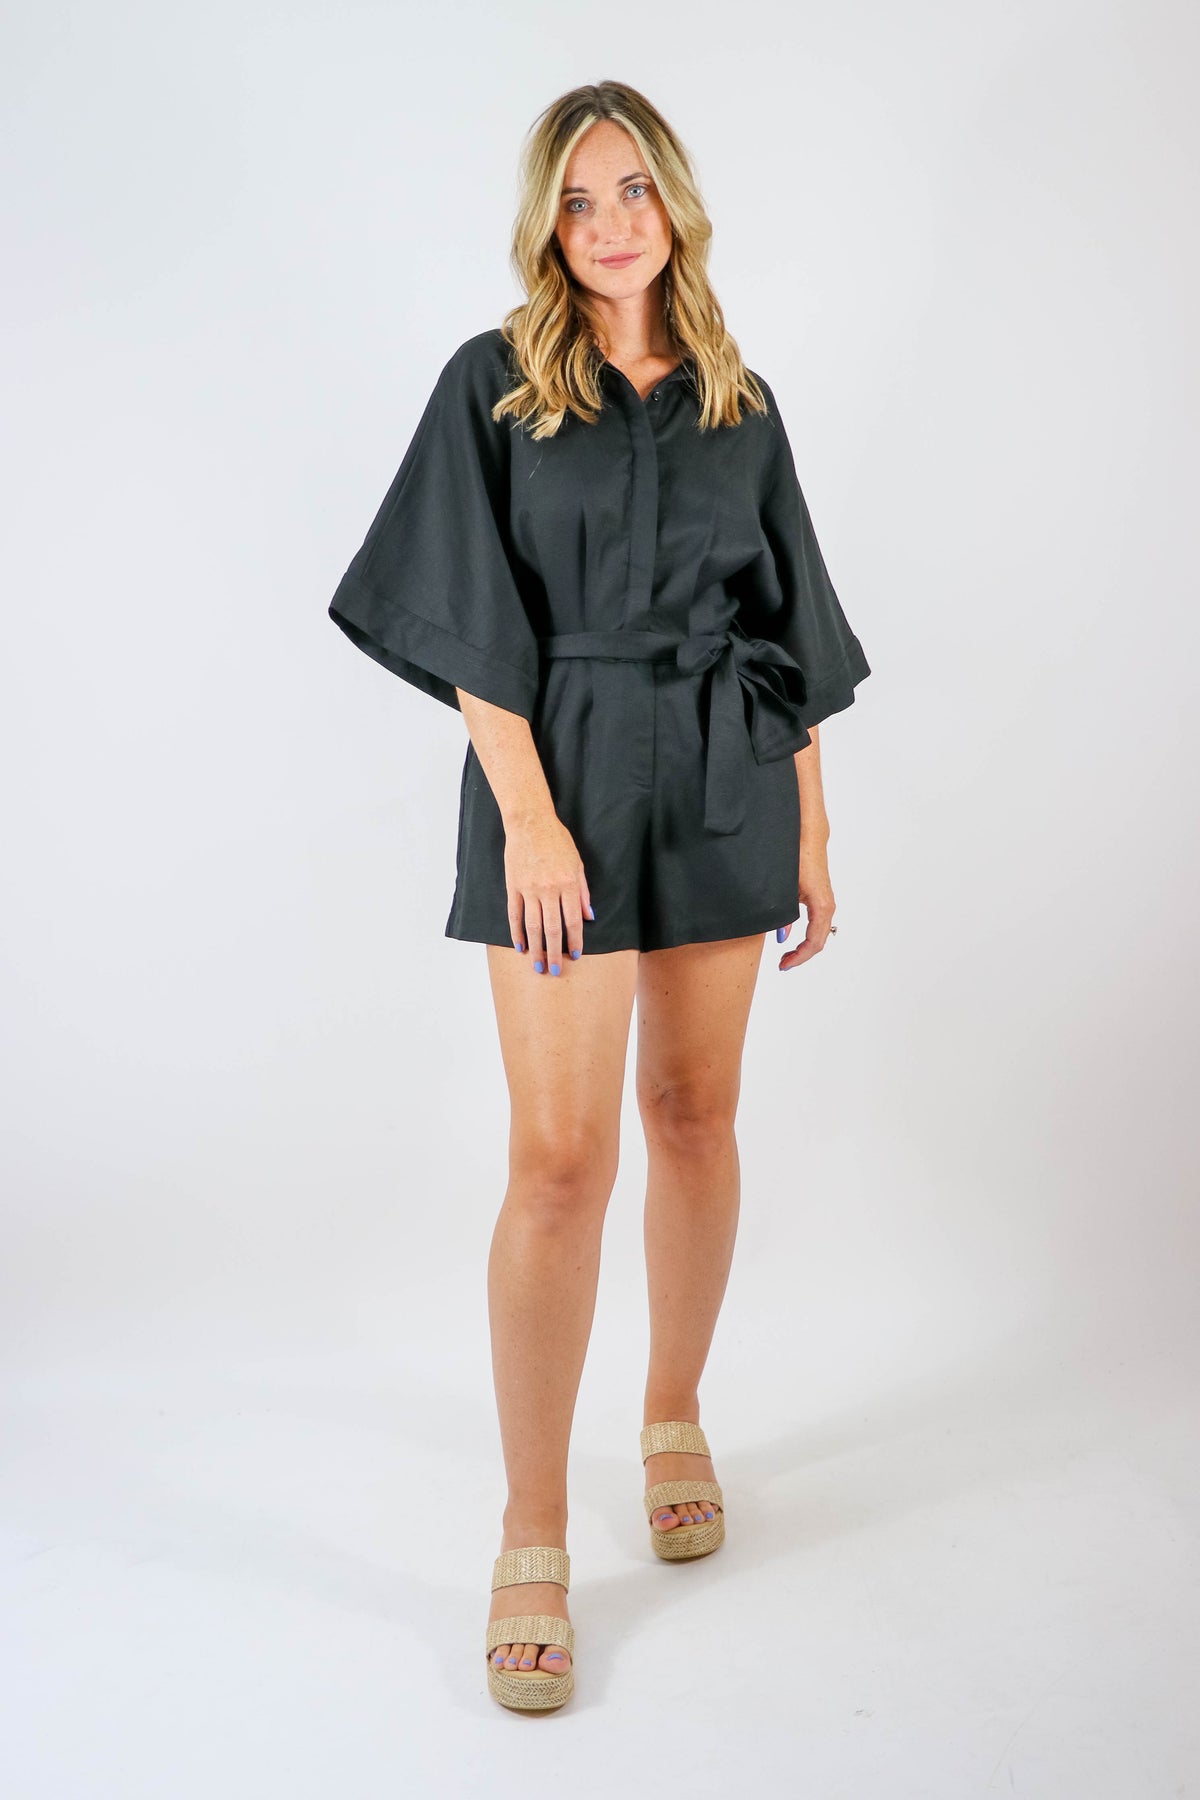 Mable | Black Short Sleeve Romper | Sweetest Stitch Online Boutique